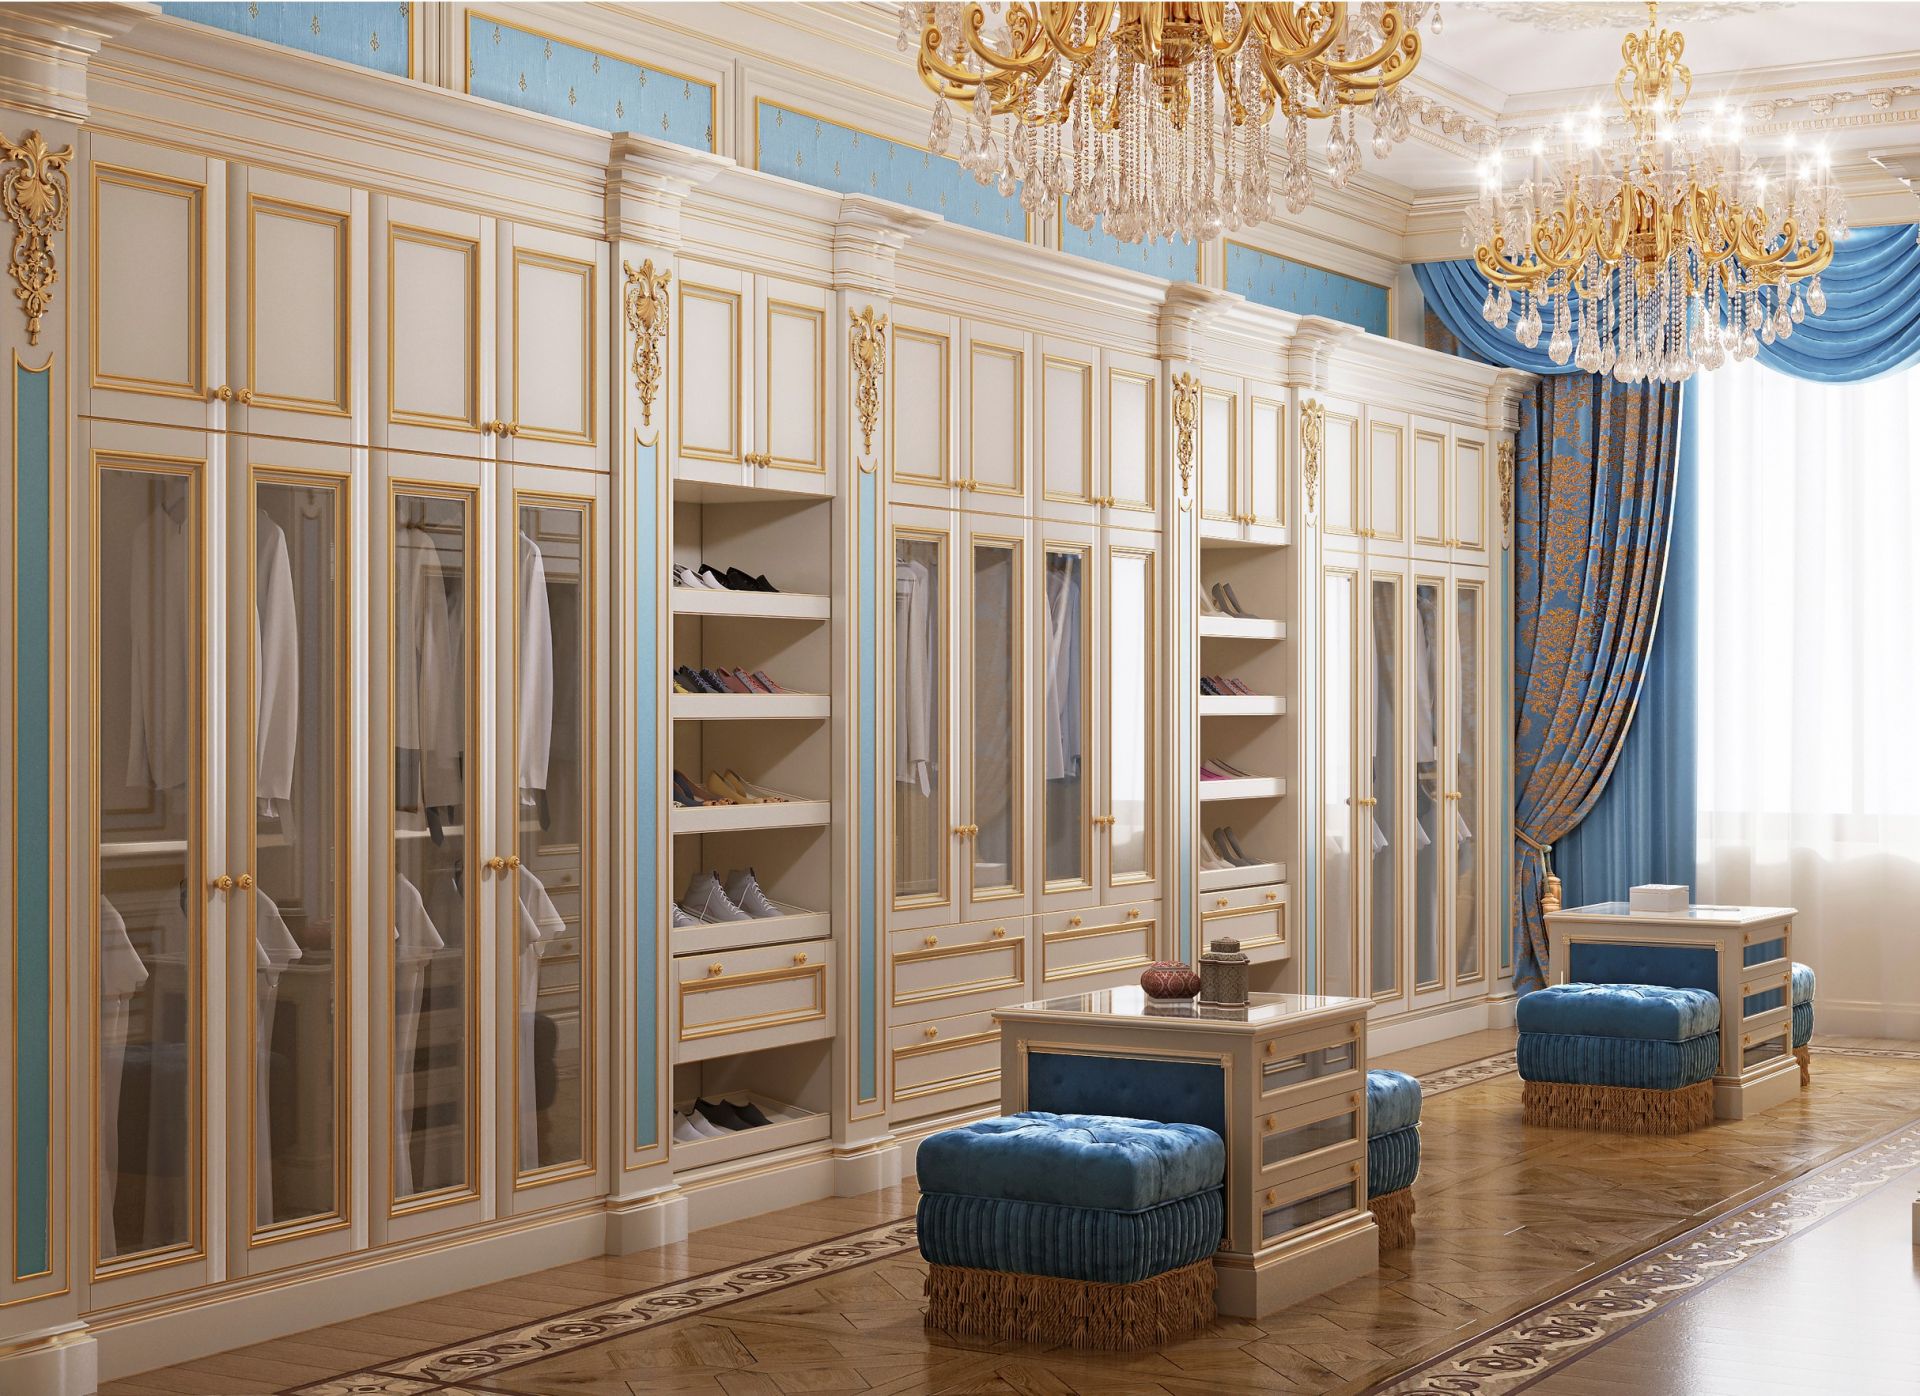 Palace-style dressing room